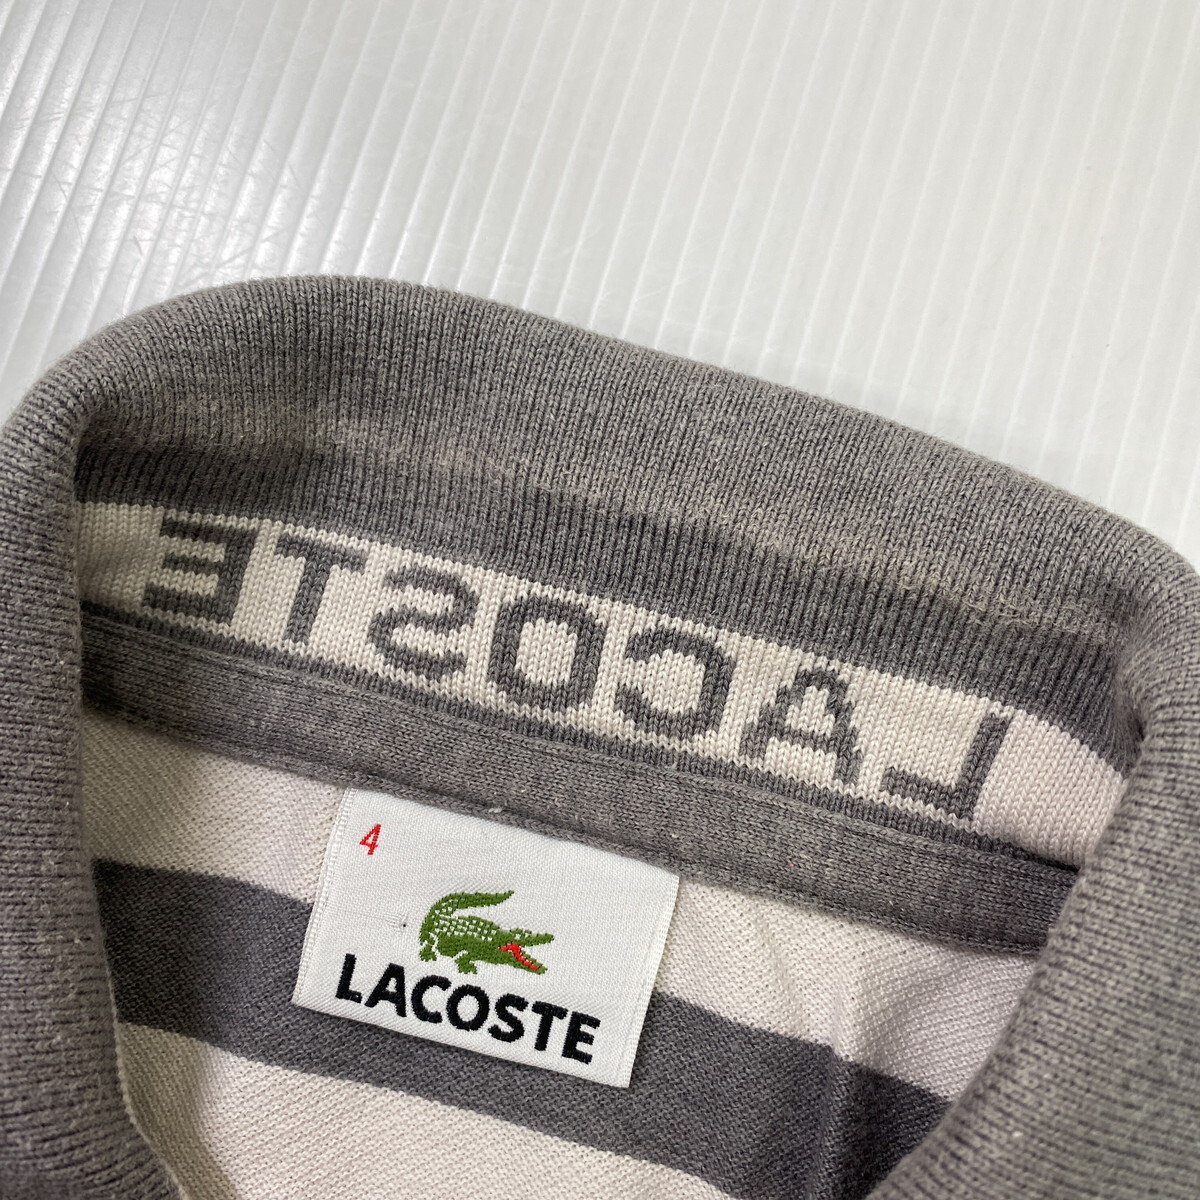 LACOSTE ラコステ ボーダーポロシャツ 4 グレー 半袖の画像5